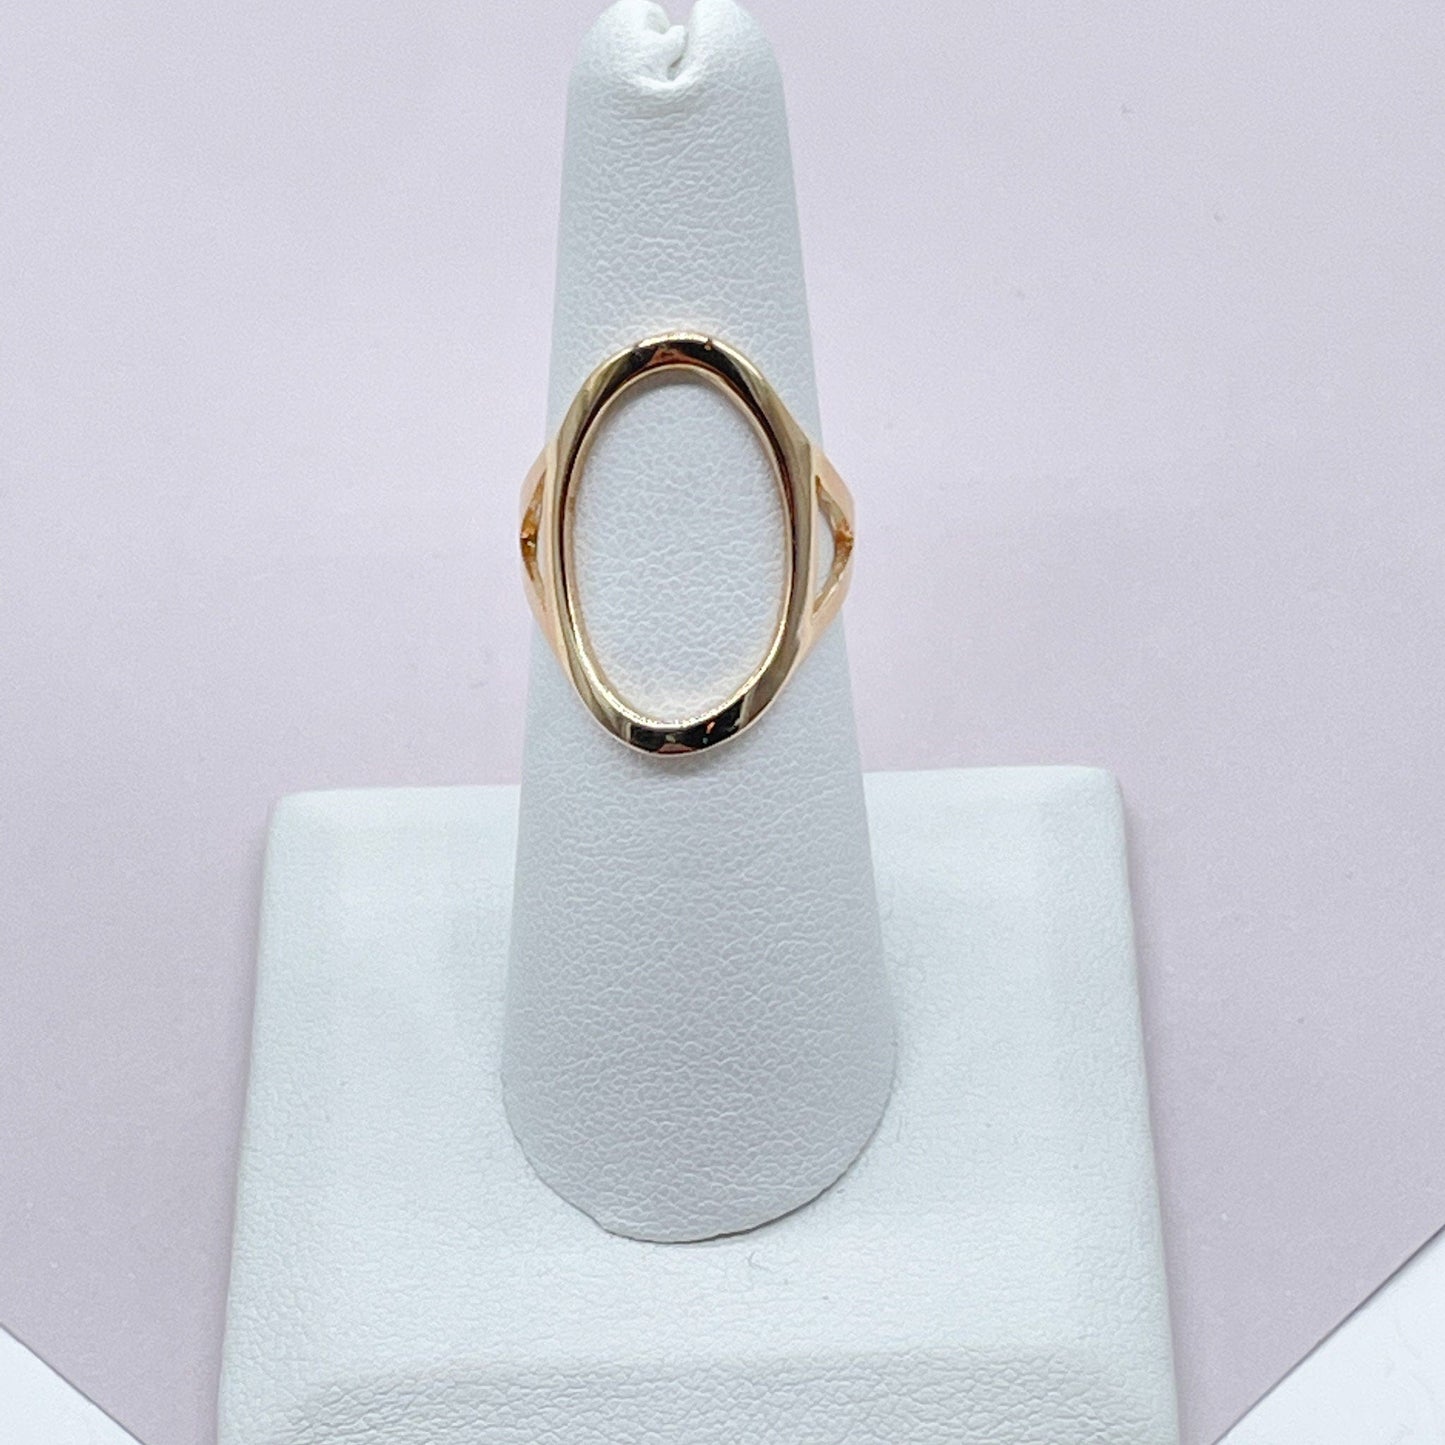 18k Gold Layered Open Oval Ring Hallowed Oval Fashion Design